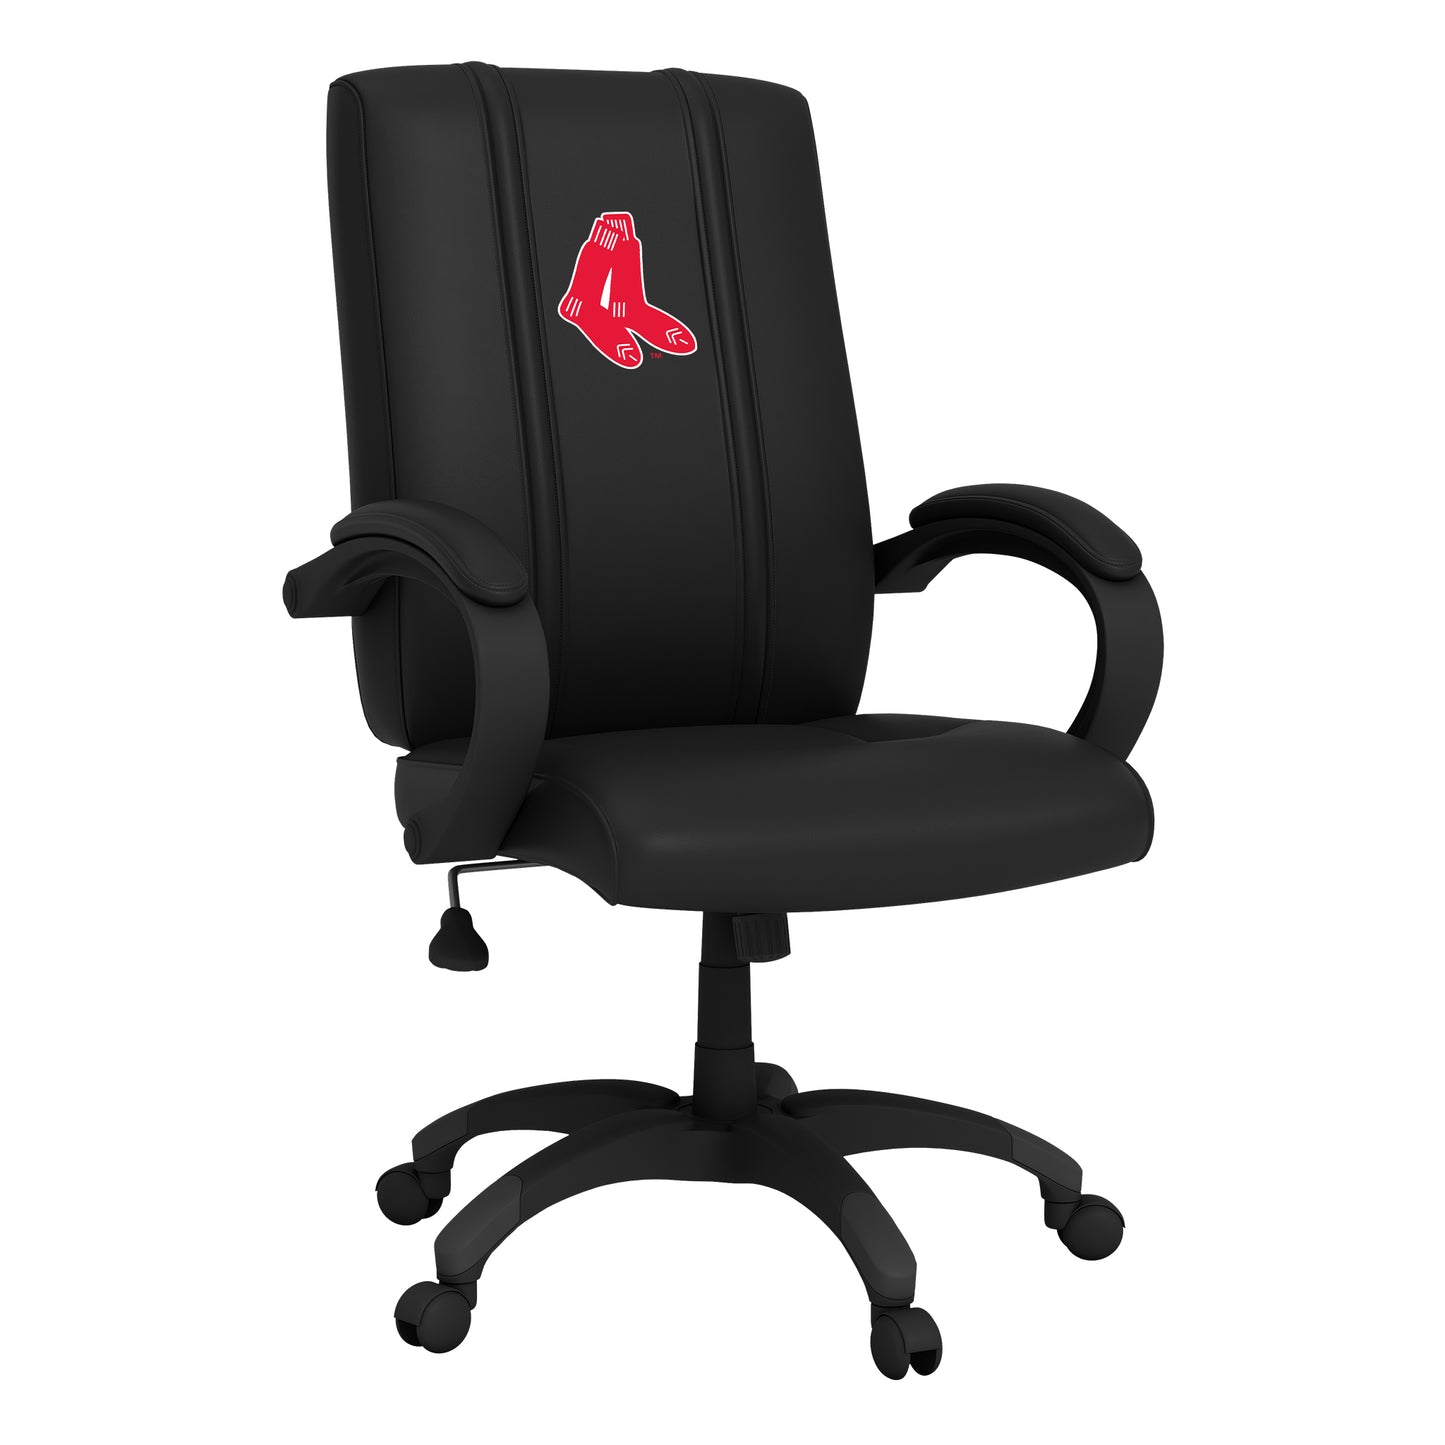 Office Chair 1000 with Boston Red Sox Cooperstown Primary